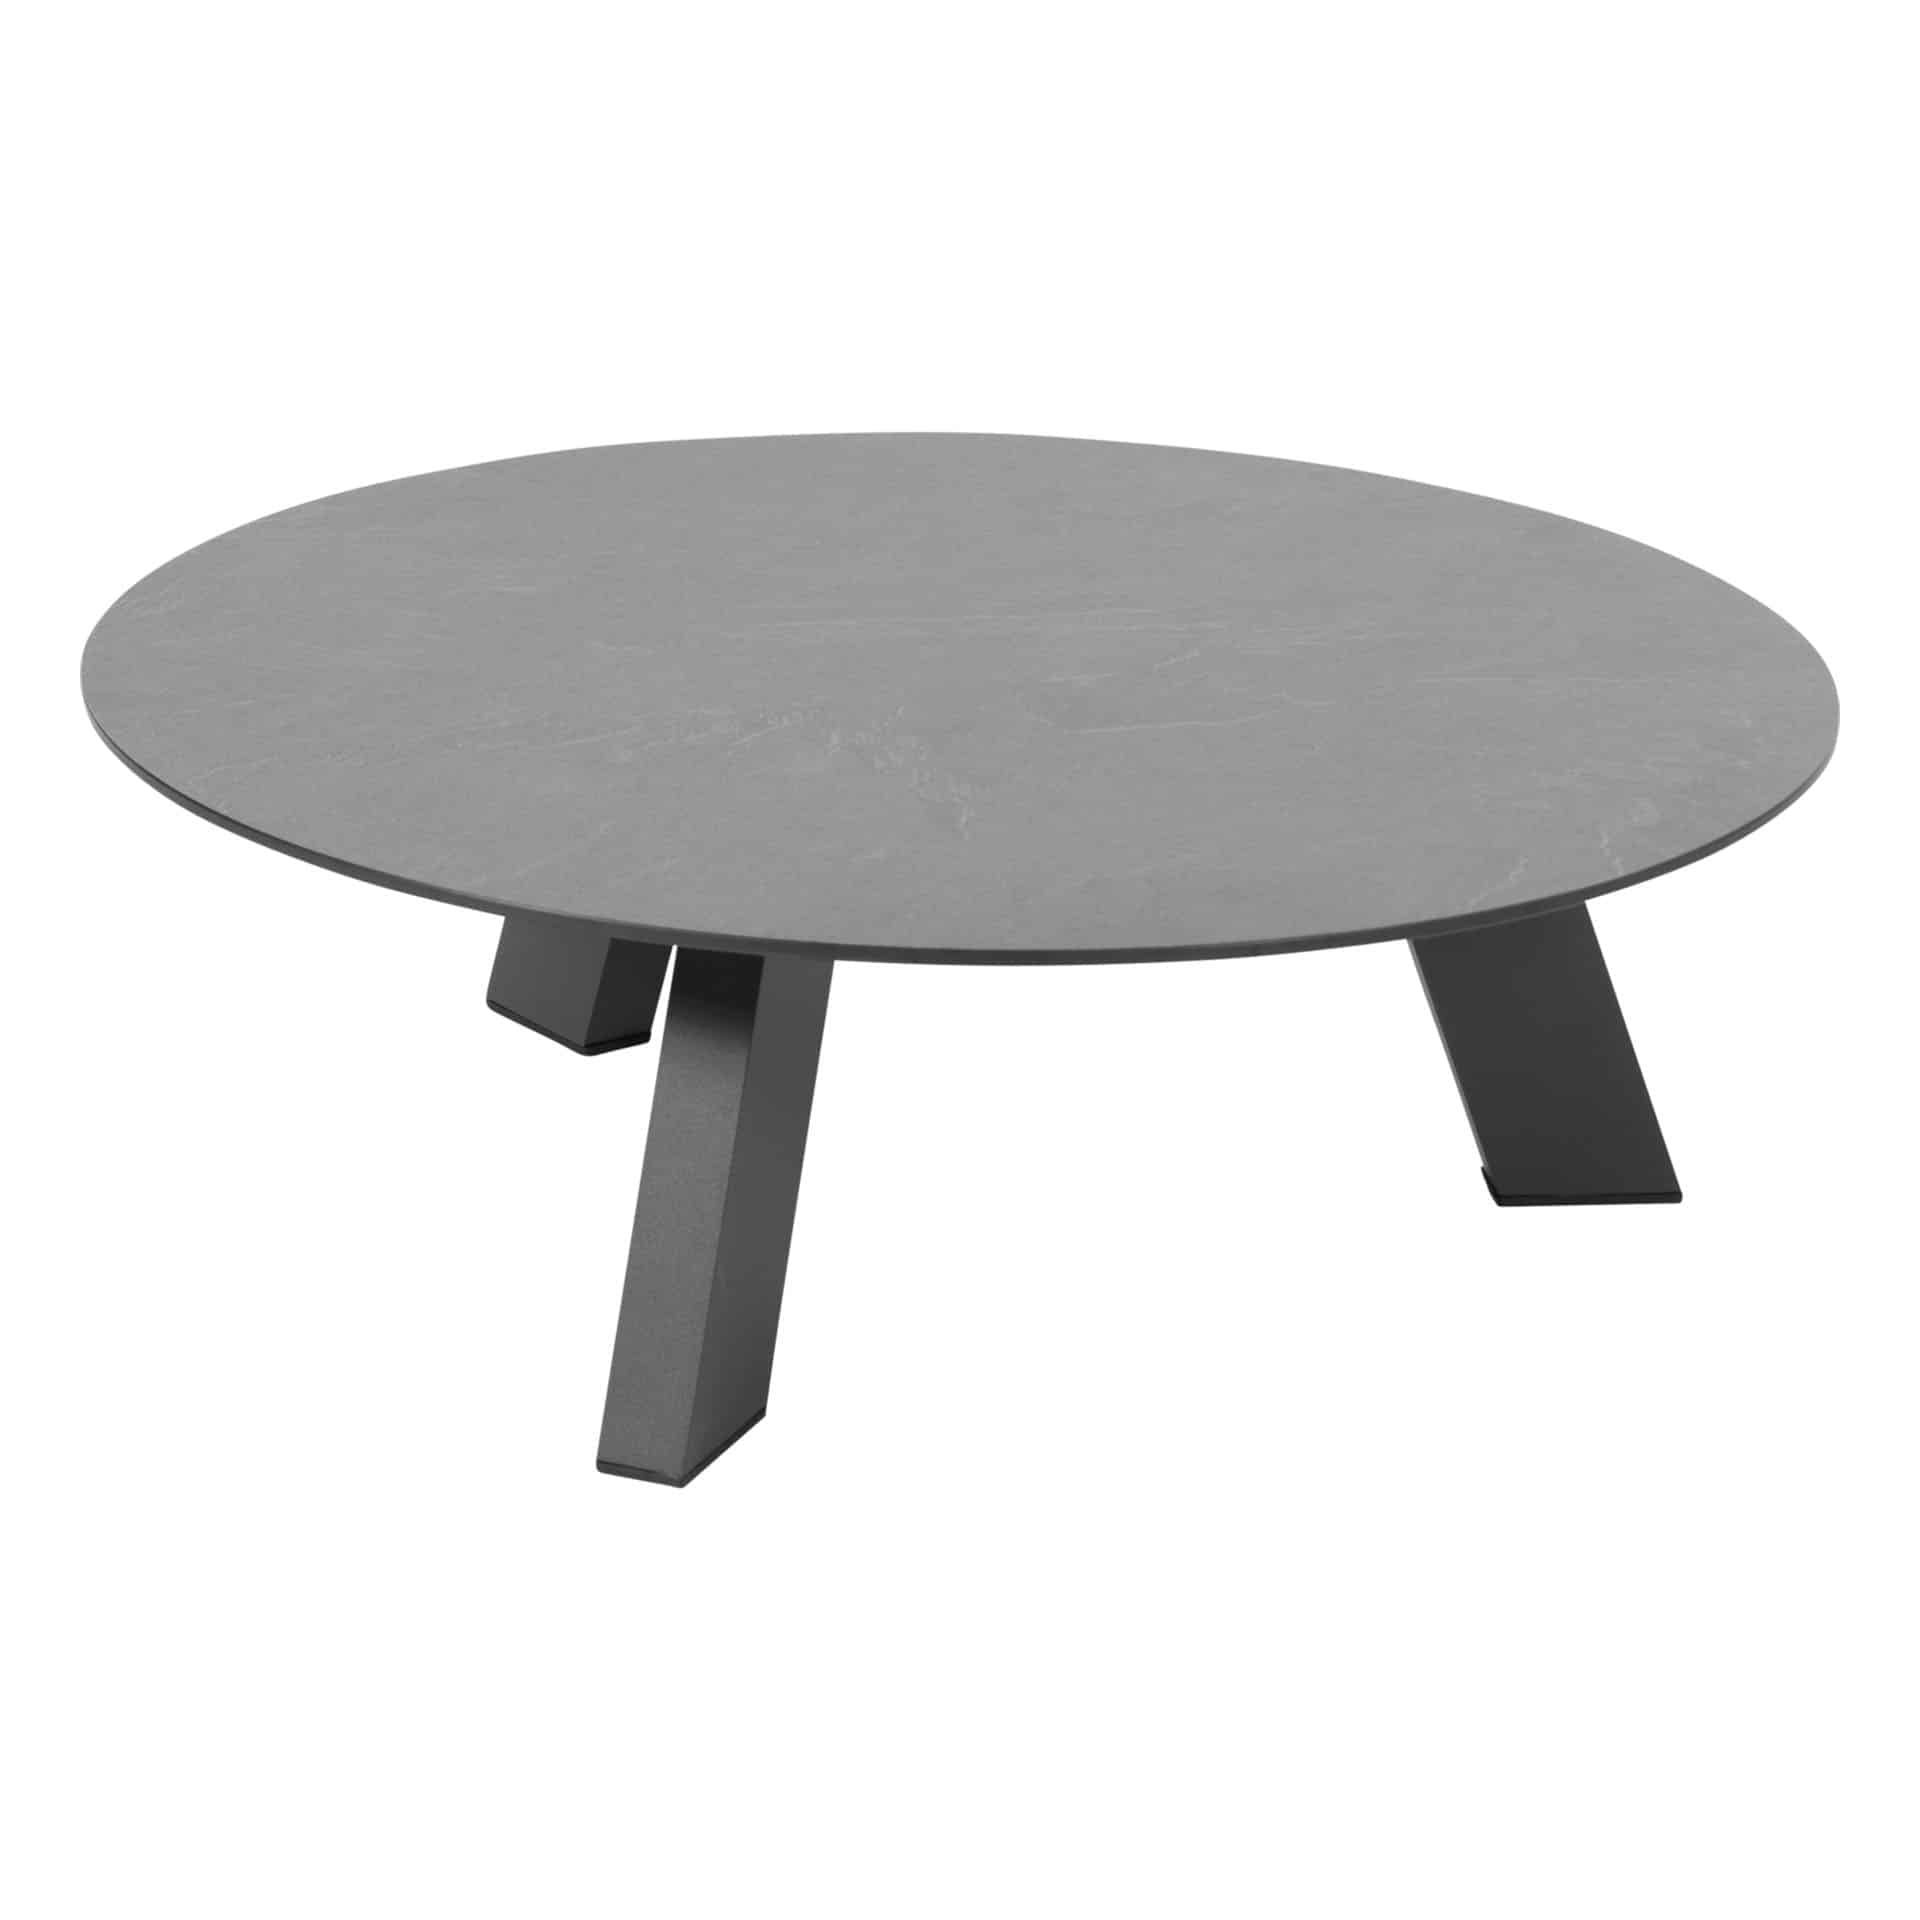 19906_-Cosmic-coffee-table-round-HPL-slate-anthracite-78X25-cm-01